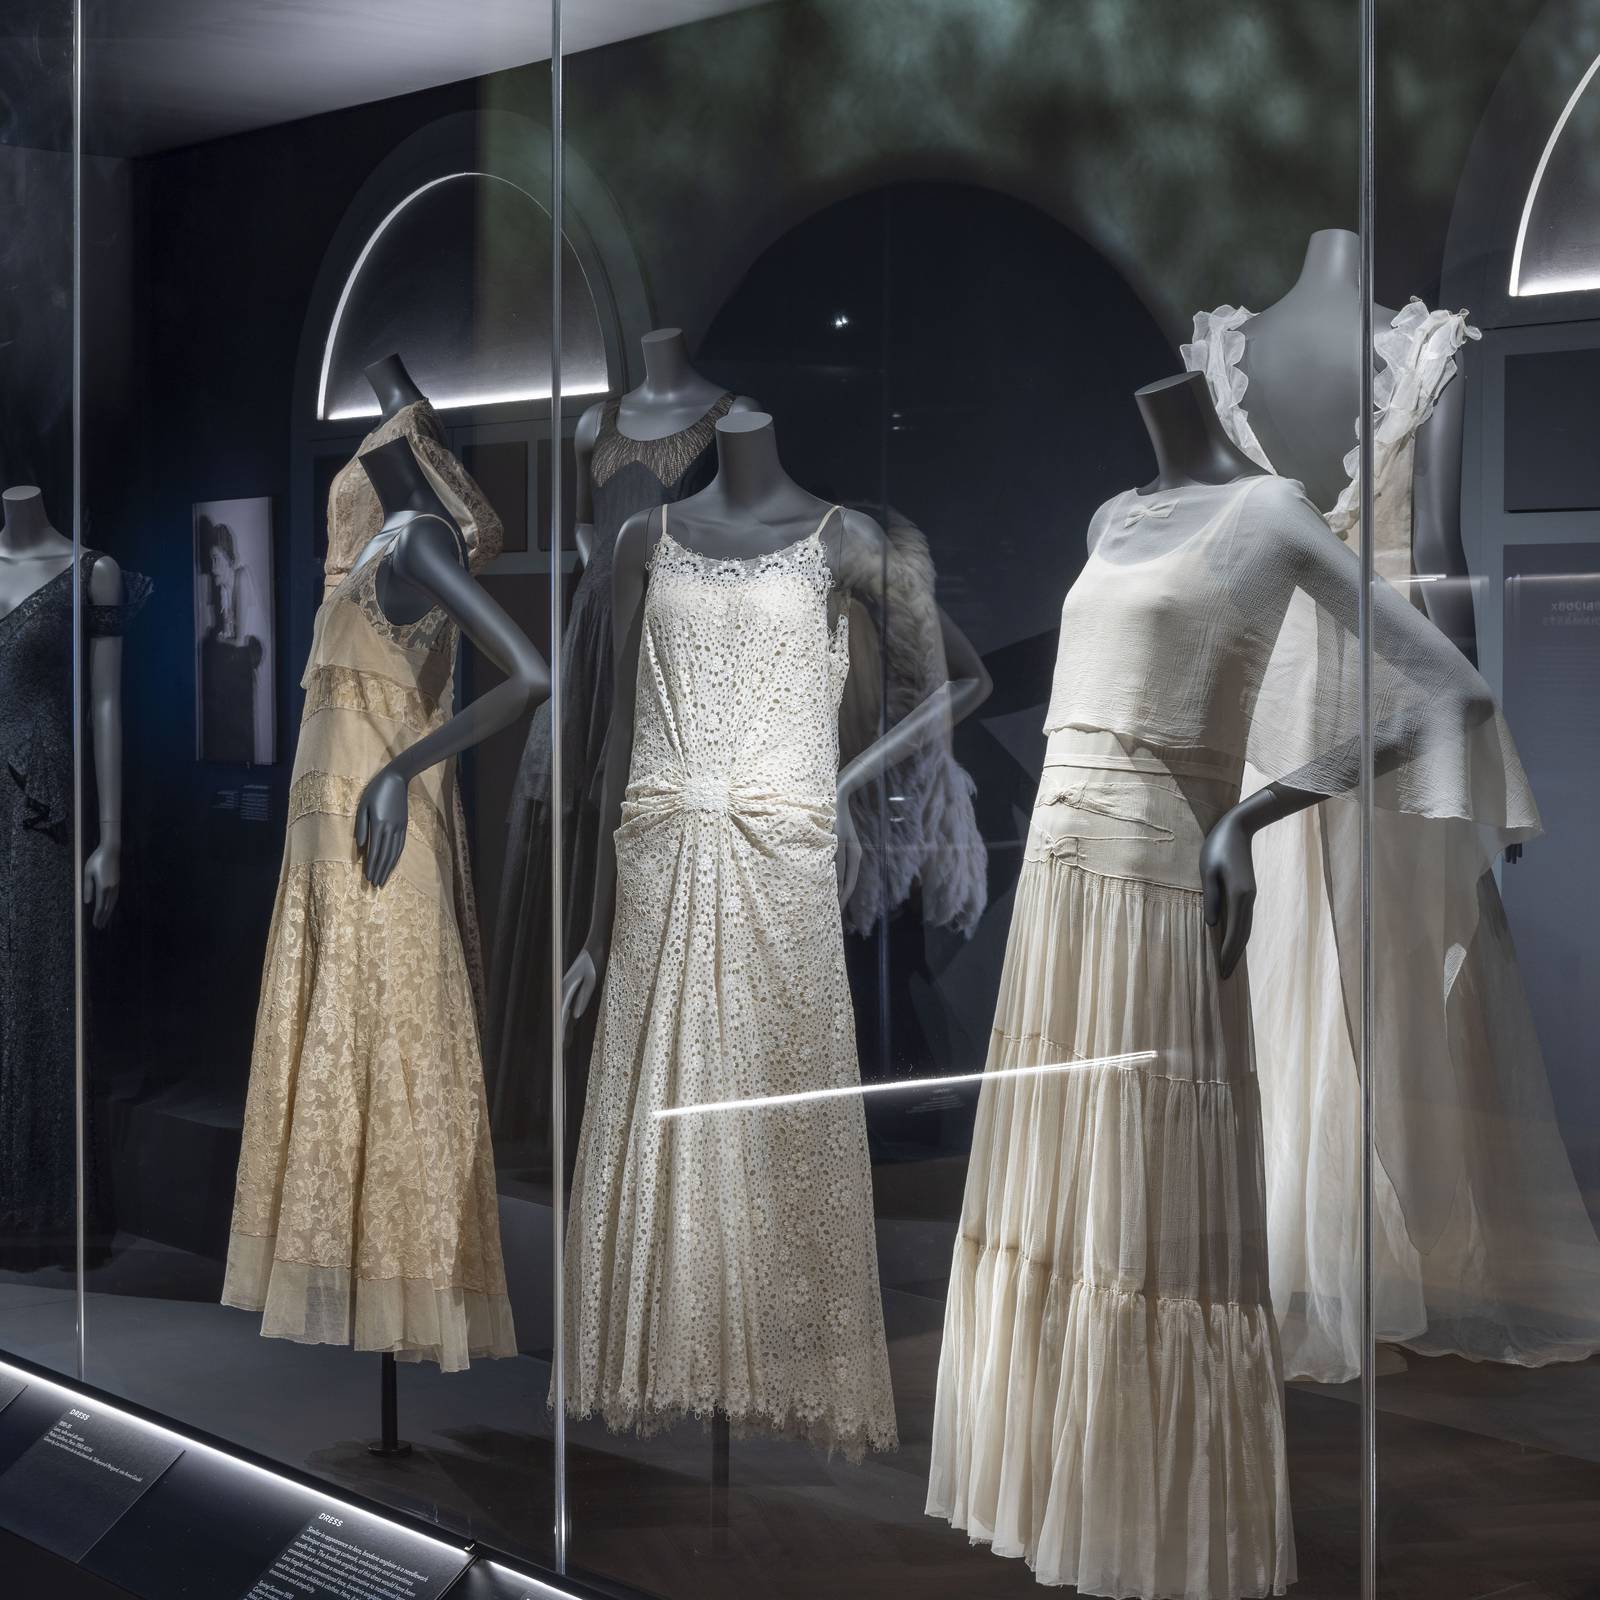 Chanel at the V&A: A captivating exhibition showcasing the beauty